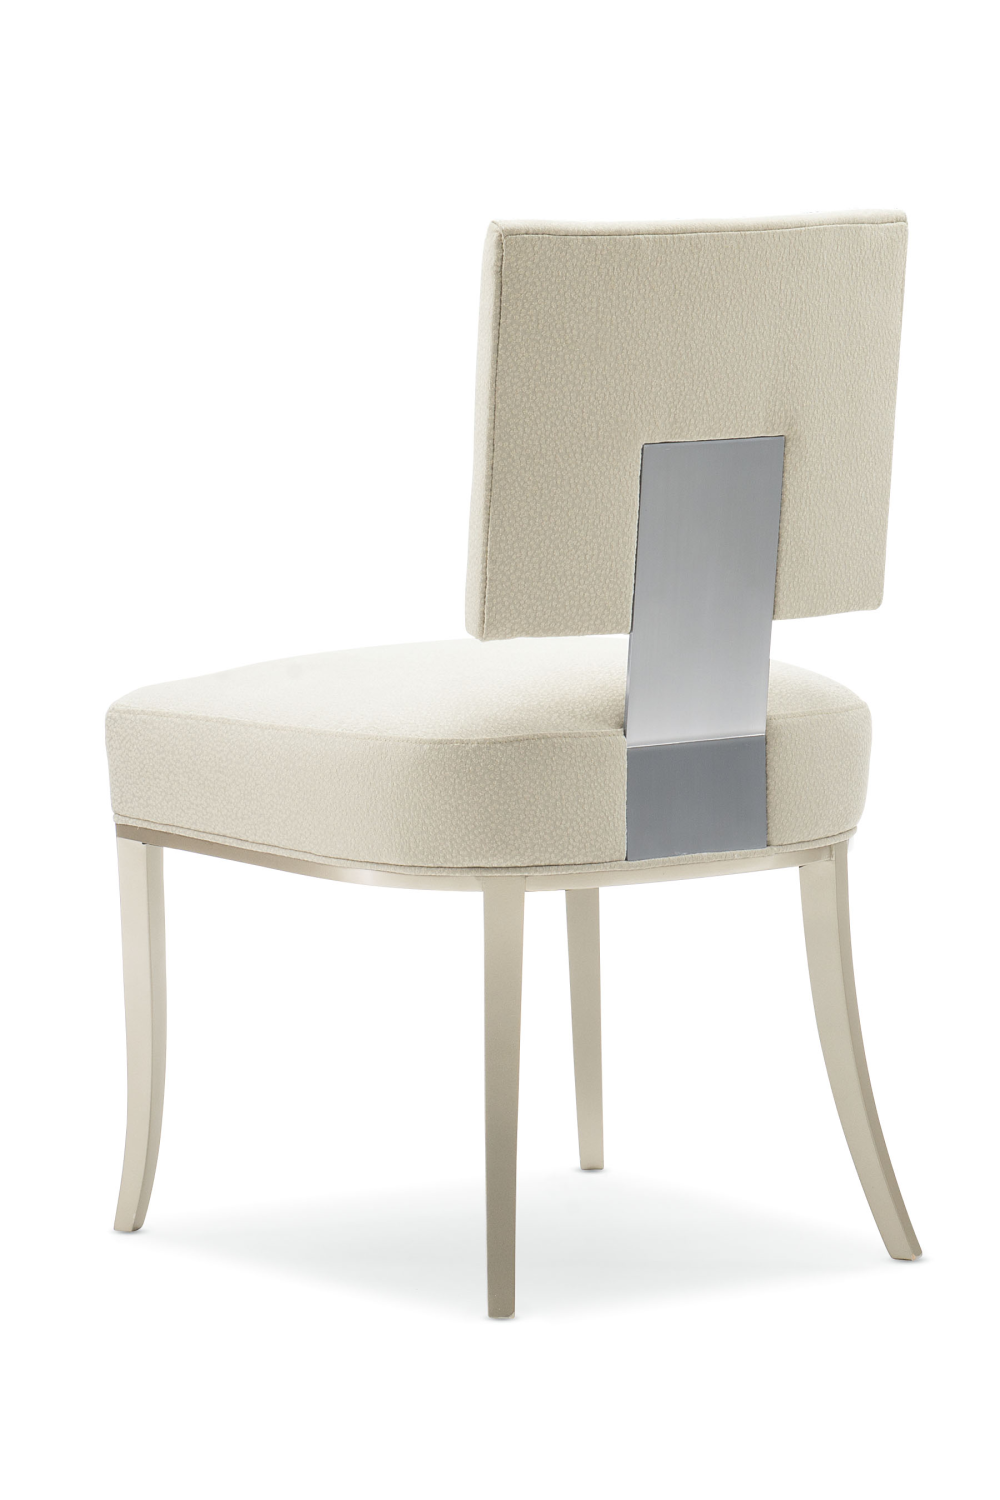 Sateen Modern Klismos Dining Chair (2) | Caracole Reserved Seating | Oroa.com